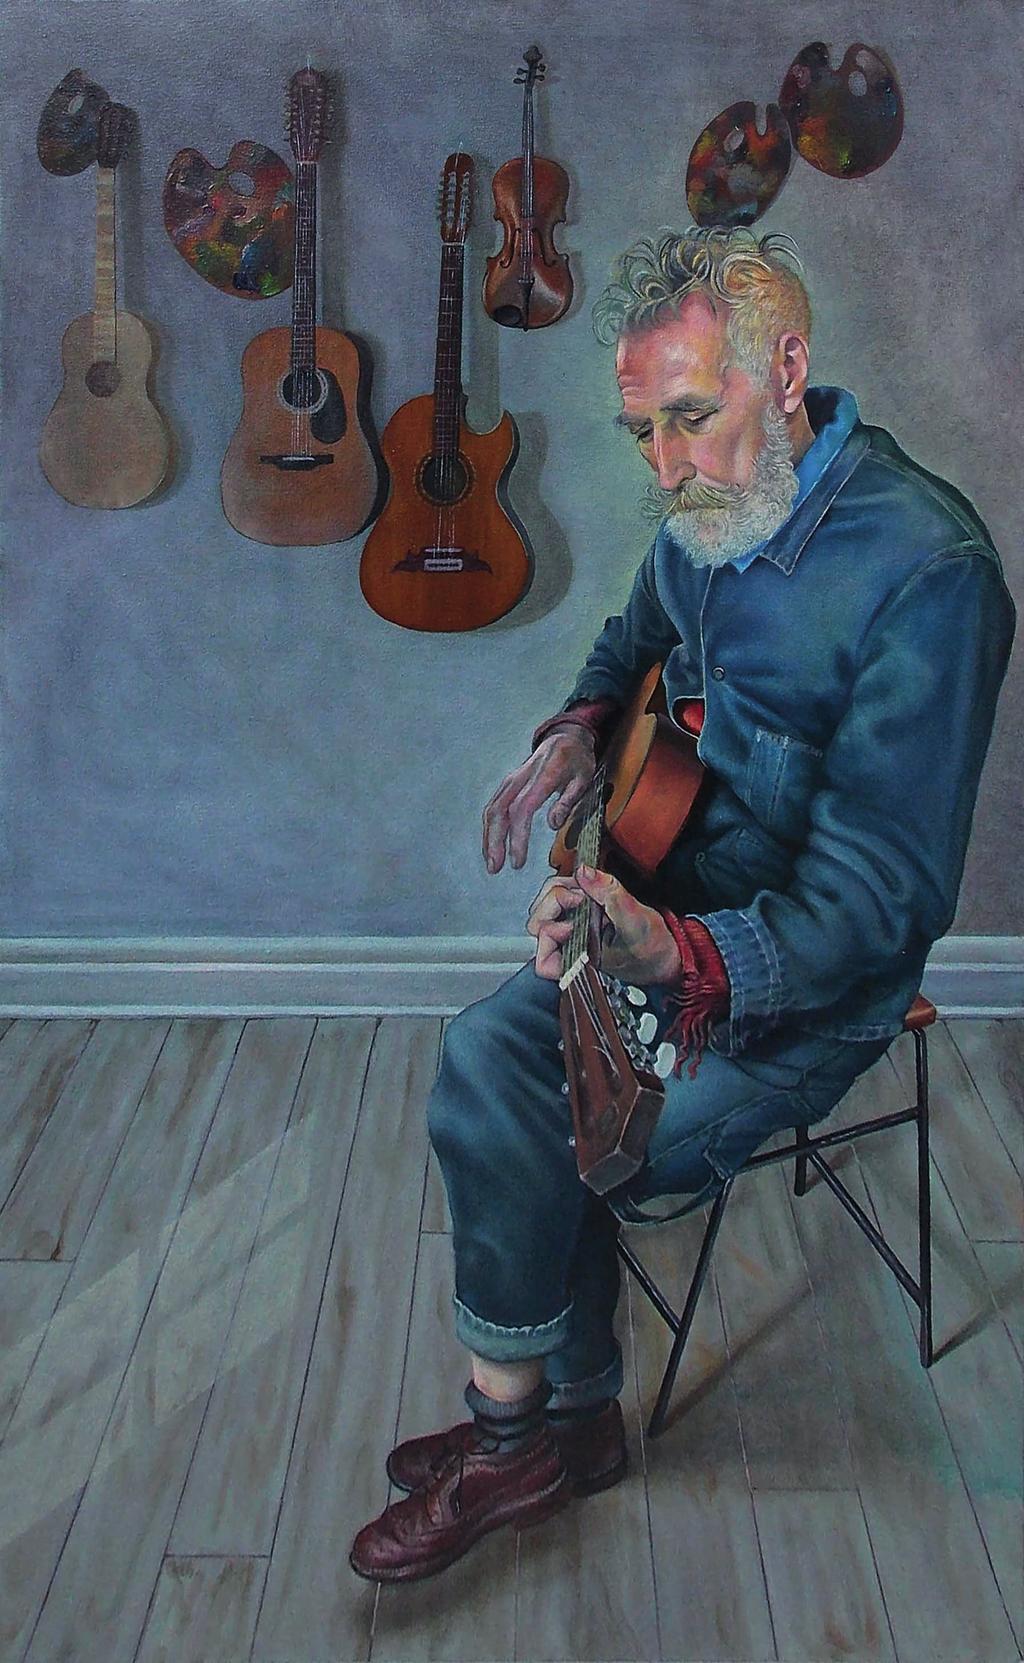 SECTION 1 EXPRESSIVE ART STUDIES (continued) Image for Q5 John Byrne and His Guitars (2014) by Mark Mulholland oil paint on canvas (84 54 cm) 5.